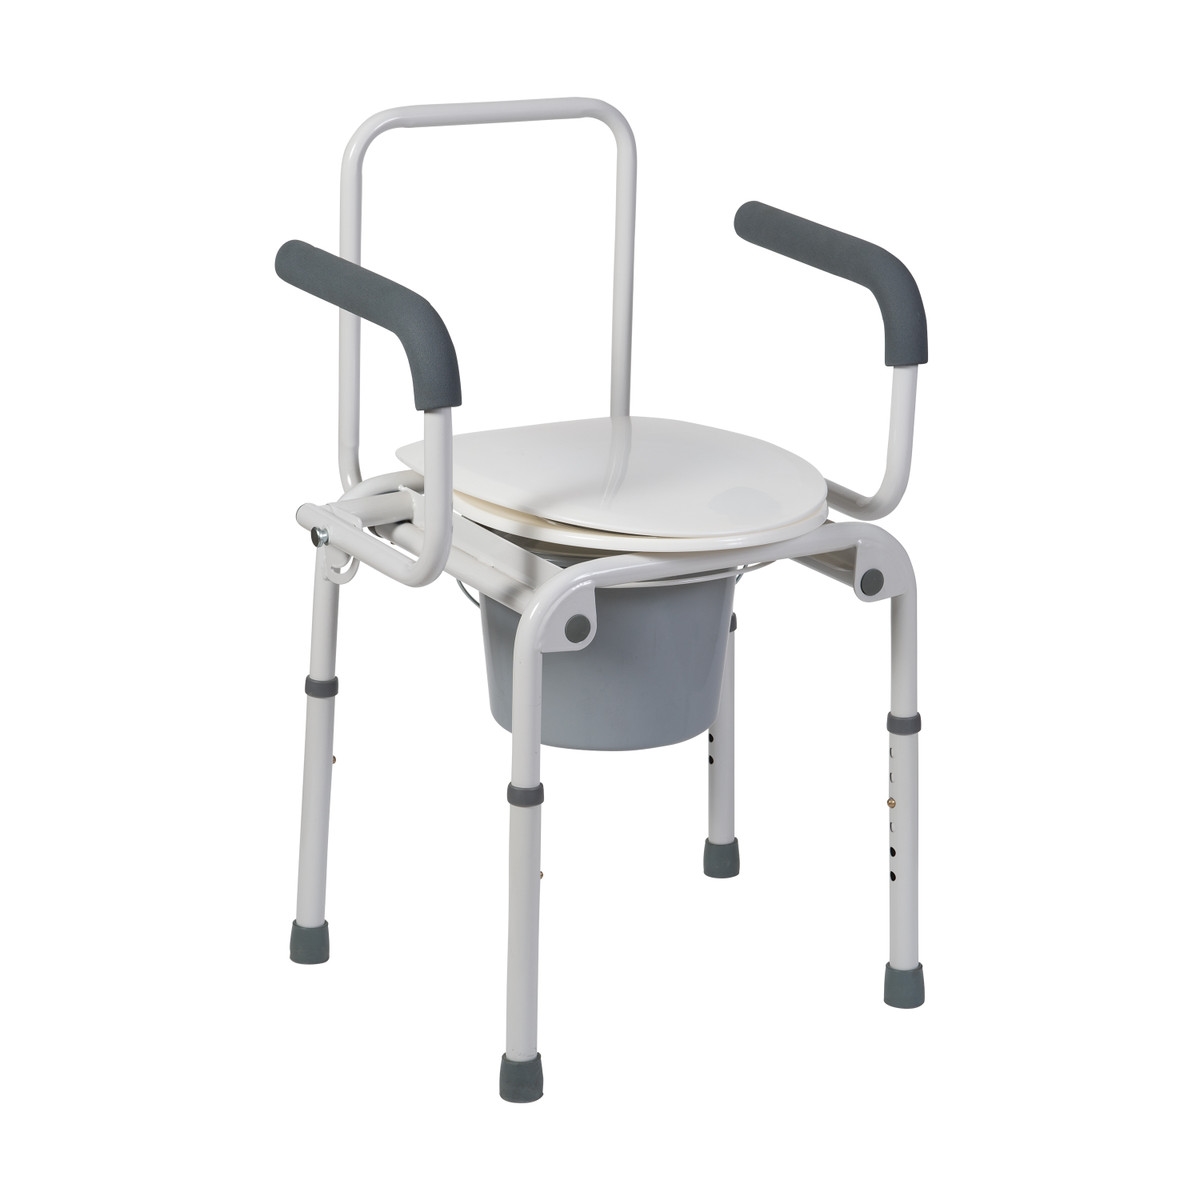 HealthSmart DMI Steel Drop-Arm Bedside Commode | Supports up to 250 pounds